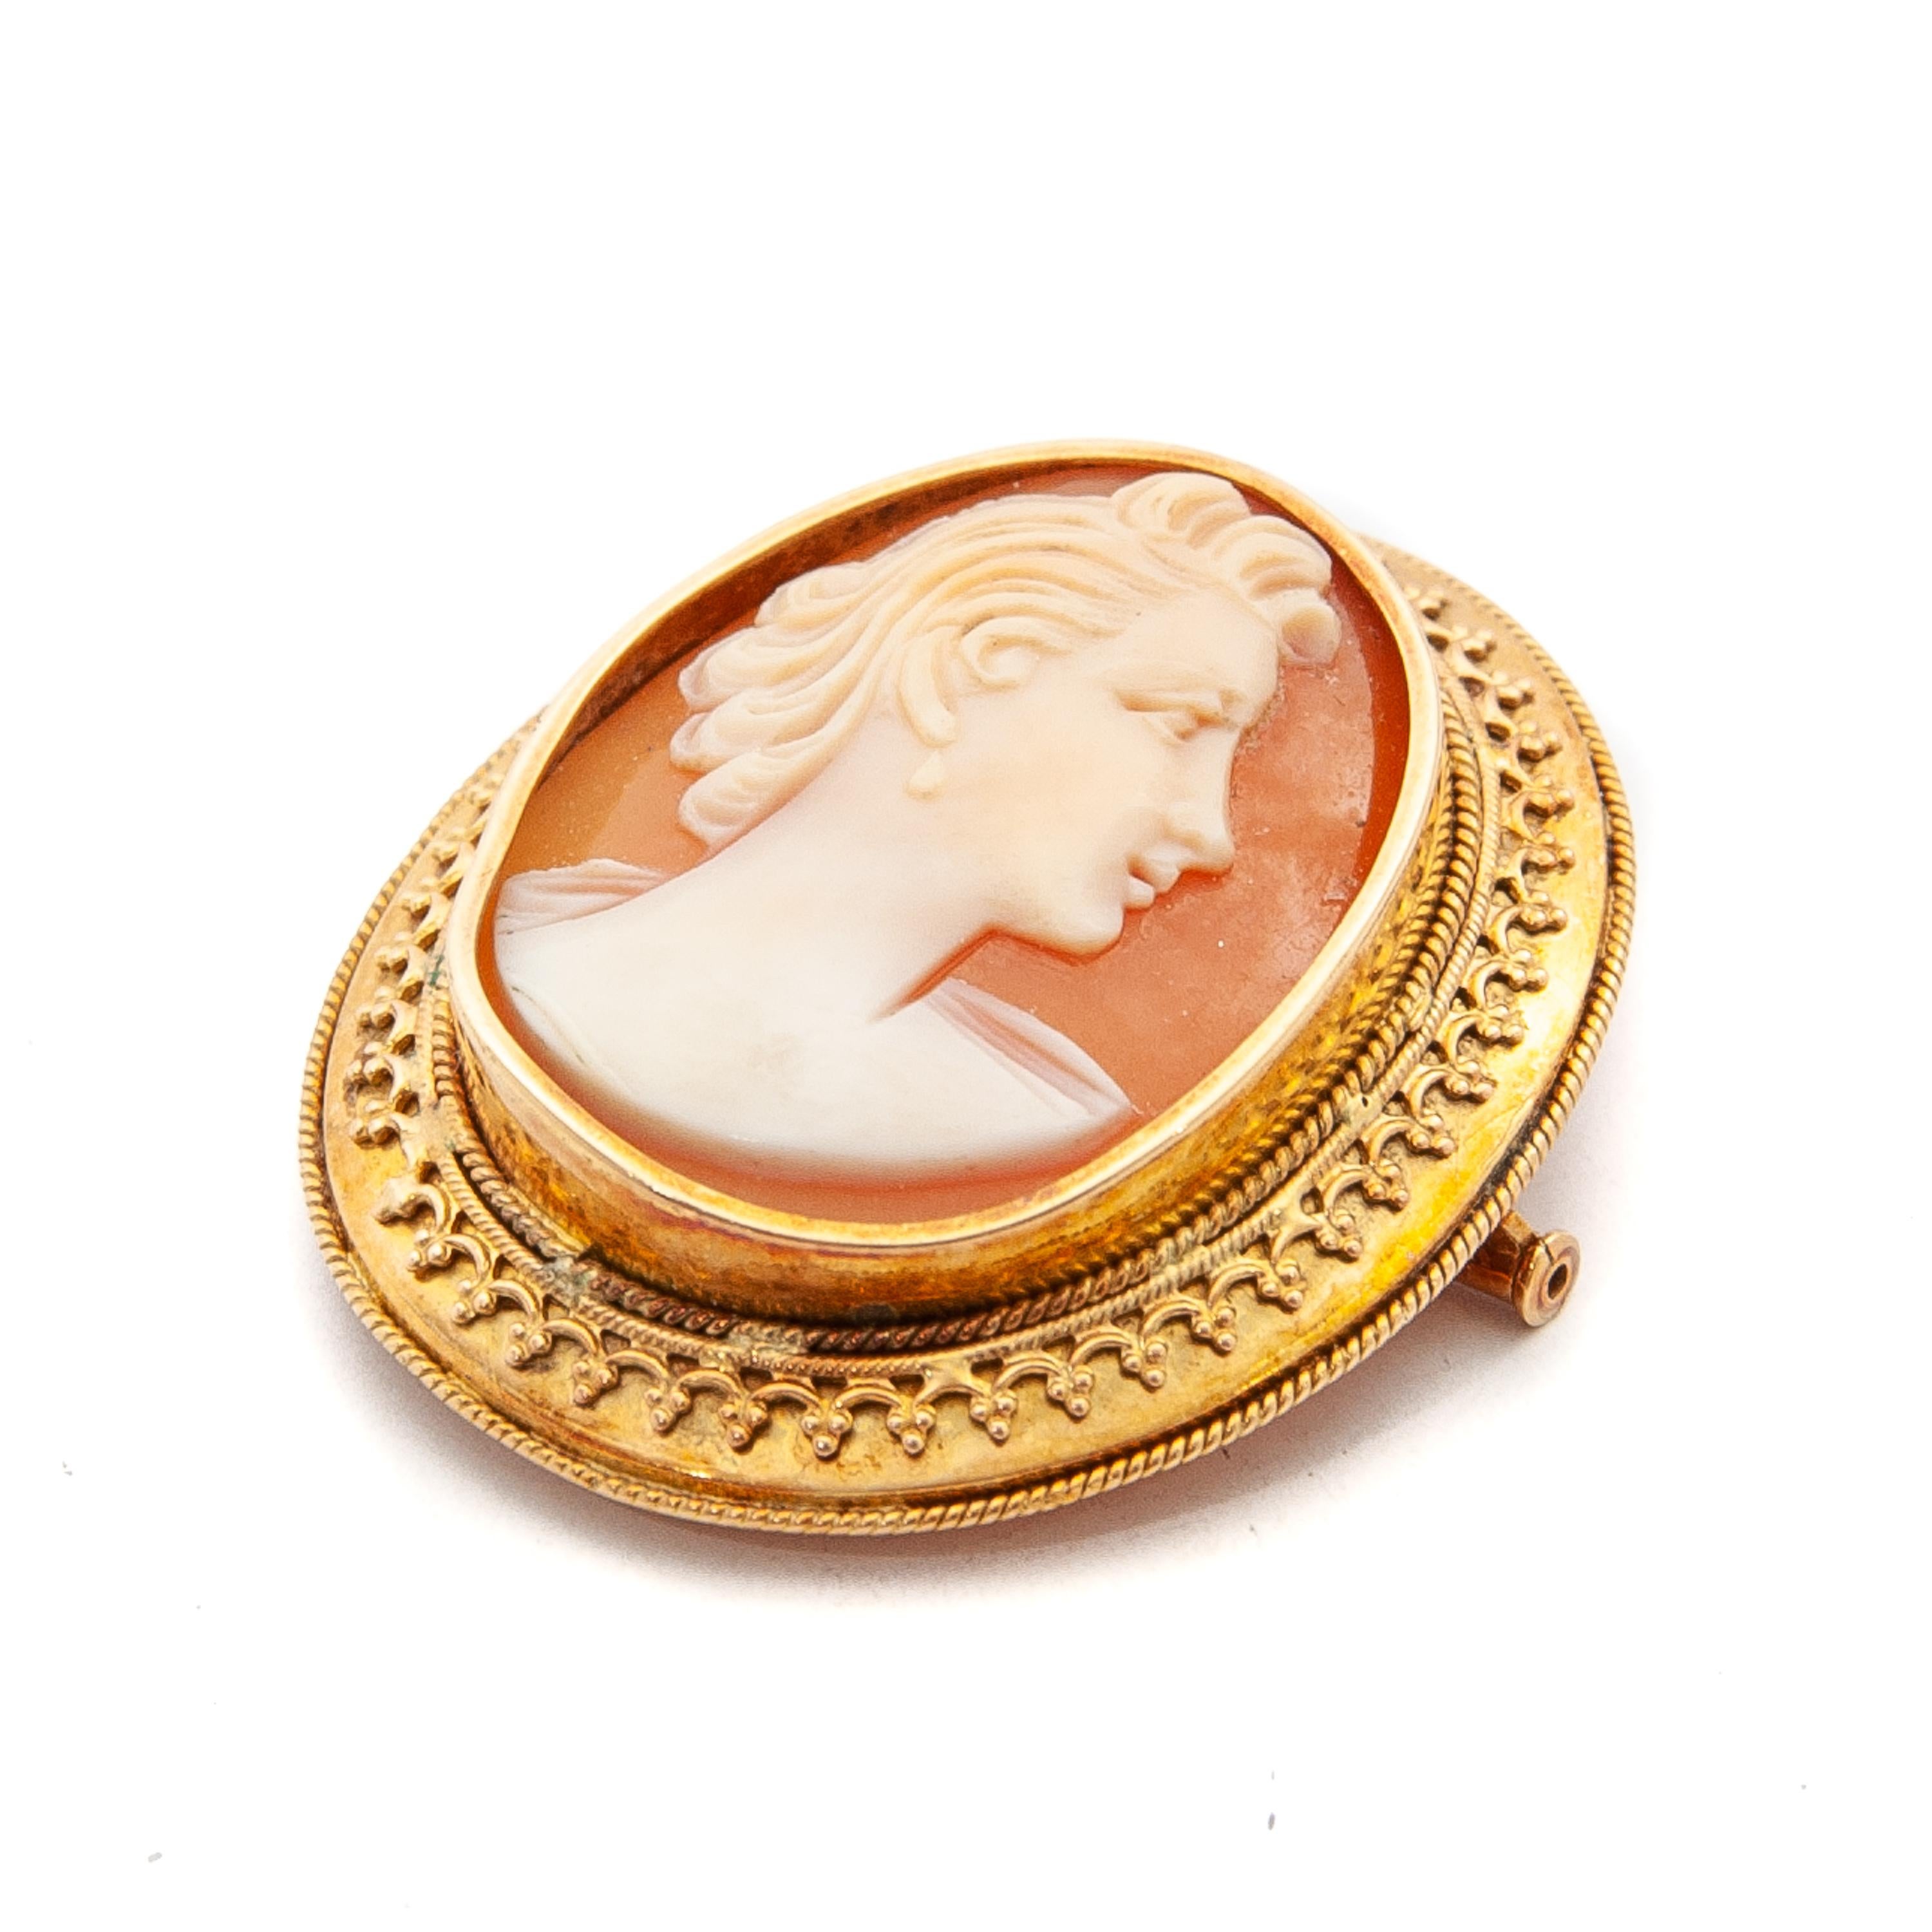 how to date a cameo brooch